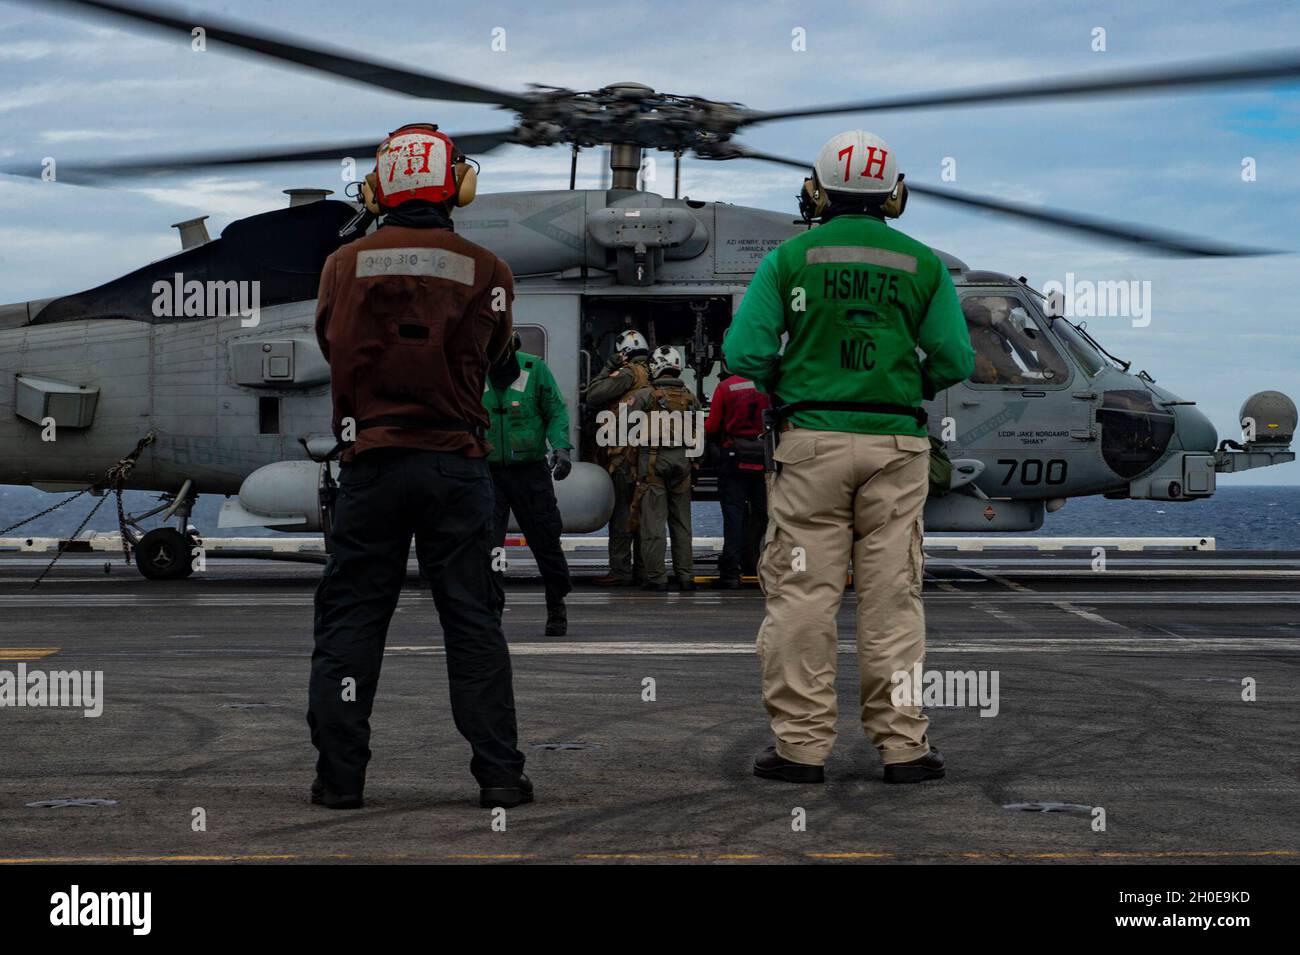 SOUTH CHINA SEA (Feb. 9, 2021) – U.S. Navy Aviation Machinist’s Mate 2nd Class Aaron Decano, from Baguio City, Philippines, left, and Chief Aviation Machinist’s Mate Arturo Perez, from El Paso, Texas, observe a crew swap of an MH-60R Sea Hawk, assigned to the “Wolf Pack” of Helicopter Maritime Strike Squadron (HSM) 75, during flight operations on the flight deck of the aircraft carrier USS Theodore Roosevelt (CVN 71) Feb. 9, 2021. The Theodore Roosevelt and Nimitz Carrier Strike Groups are conducting dual-carrier operations during their deployments to the 7th Fleet area of operations. As the U Stock Photo